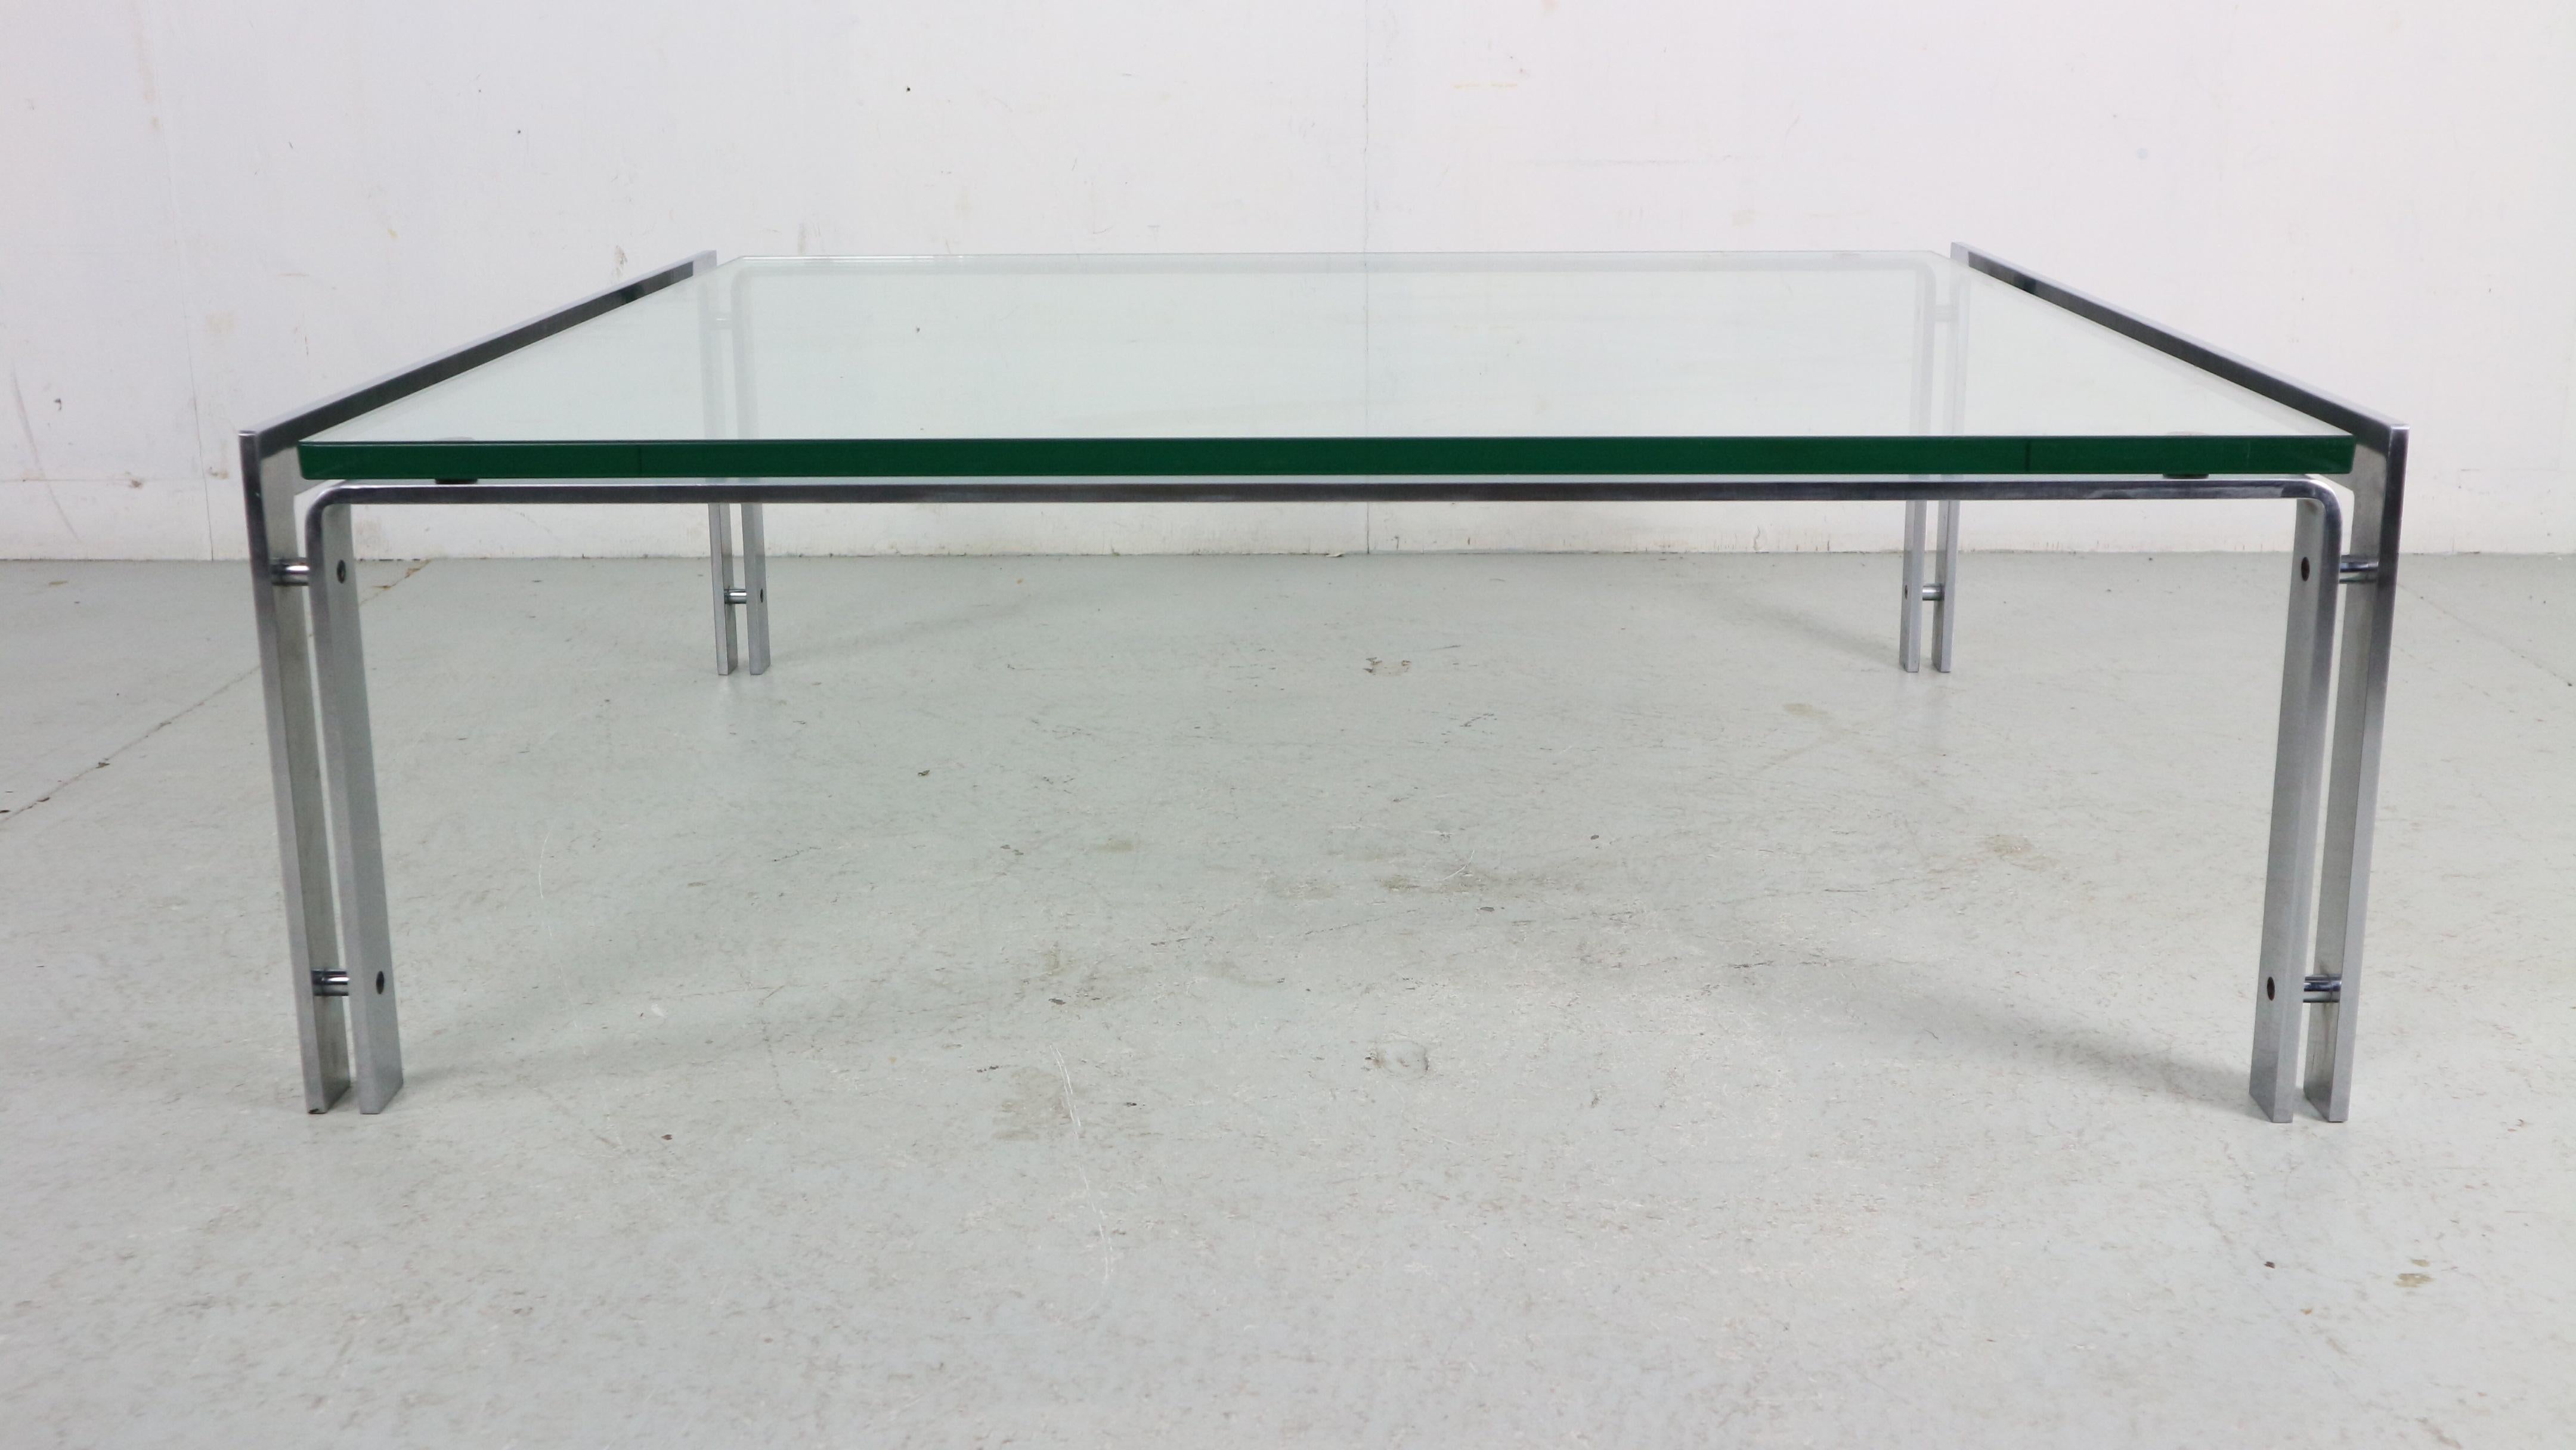 Mid-Century Modern period large coffee table designed by Hank Kwint for Metaform manufacture in The Netherlands, 1970.
This coffee table has a frame of stainless steel that supports a thick clear glass top. 
Over all the glass top has no